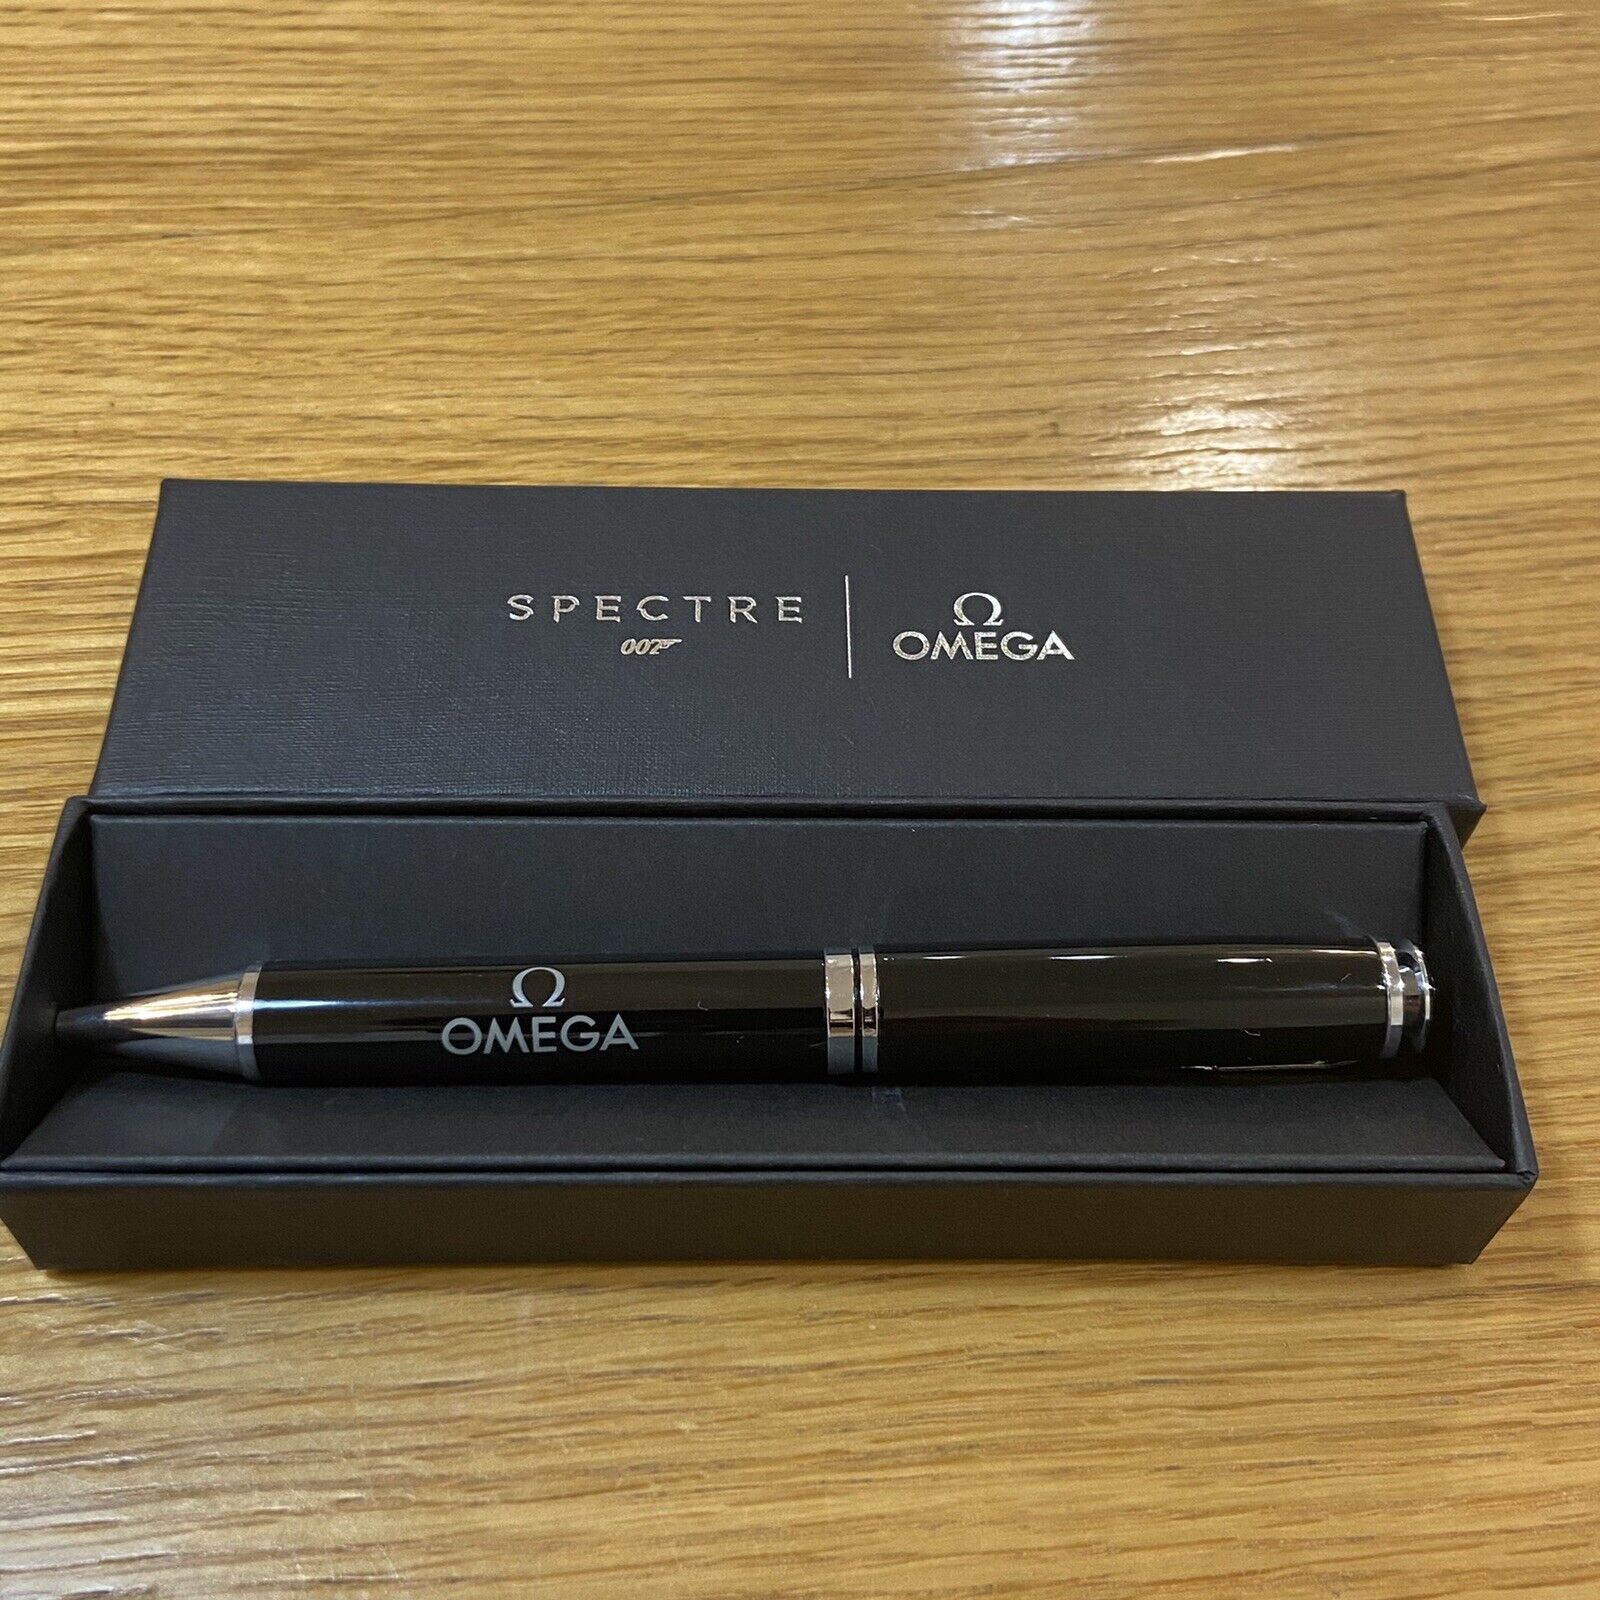 OMEGA Spectre 007 Ballpoint Pen Giveaway Not For Sale Novelty with Box Package